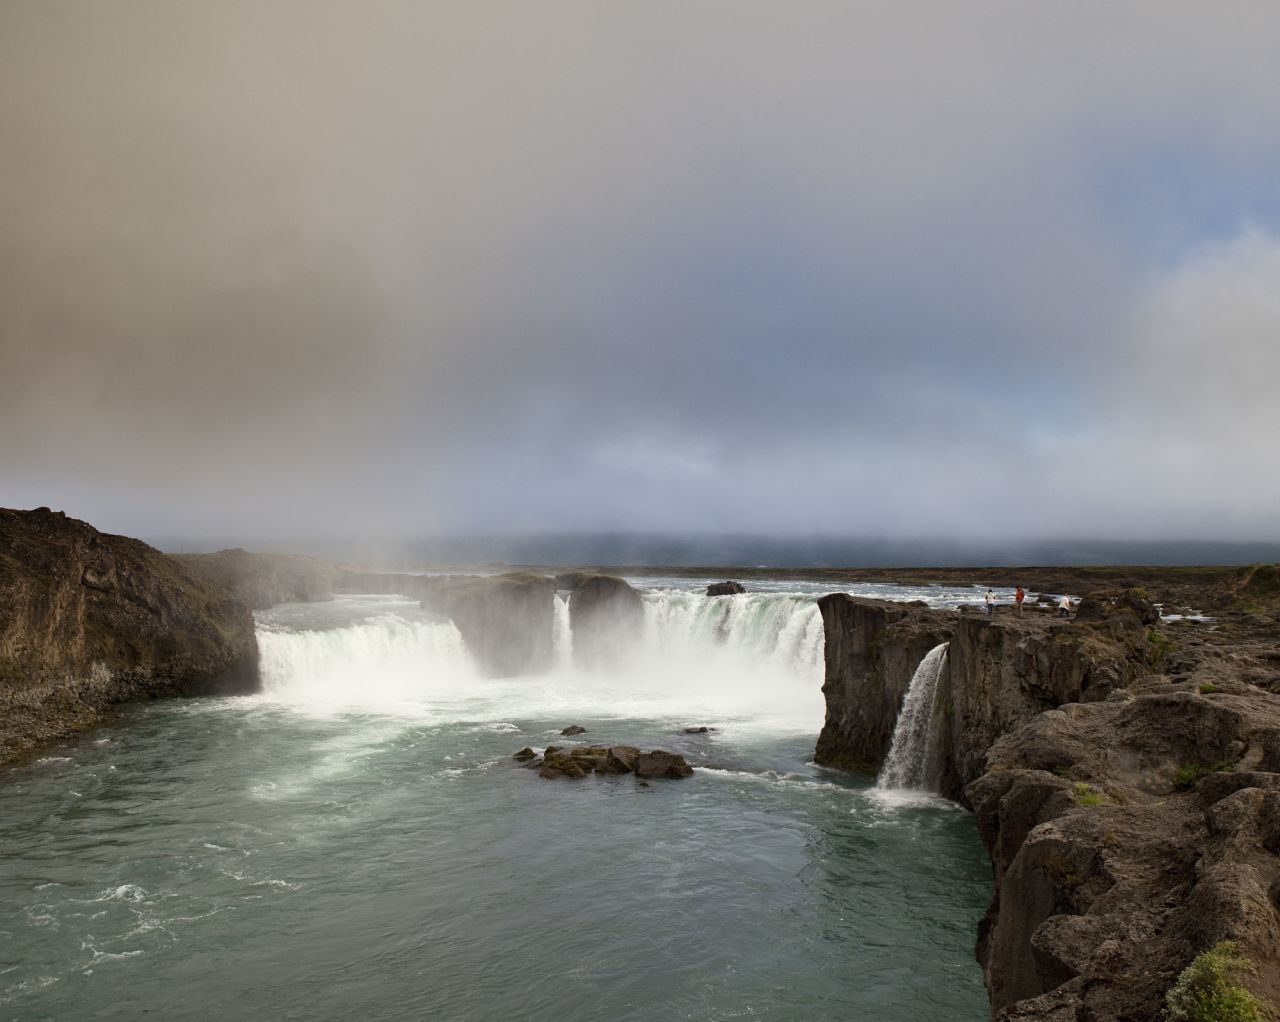 <strong>Godafoss</strong> -- The "waterfall of the Gods" is a spectacular semi-circular cataract in northeast Iceland. The water of the Skjálfandafljót River falls from a height of 12 meters over a width of 30 meters. 